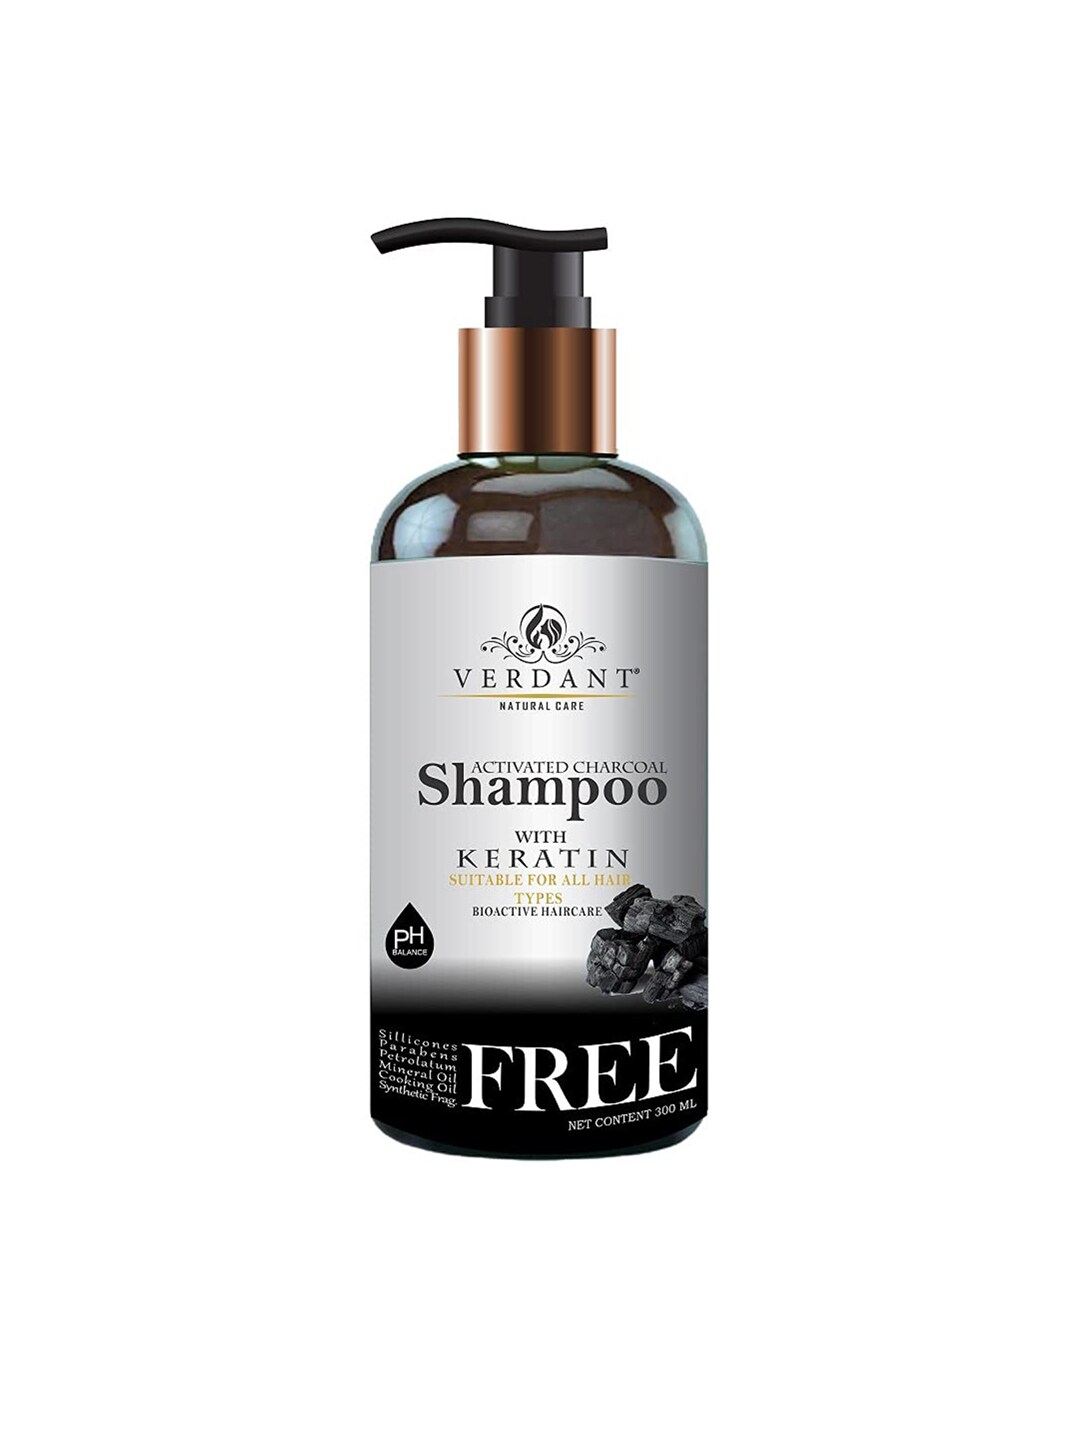 Verdant Natural Care Activated Charcoal Shampoo with Keratin – 300 ml